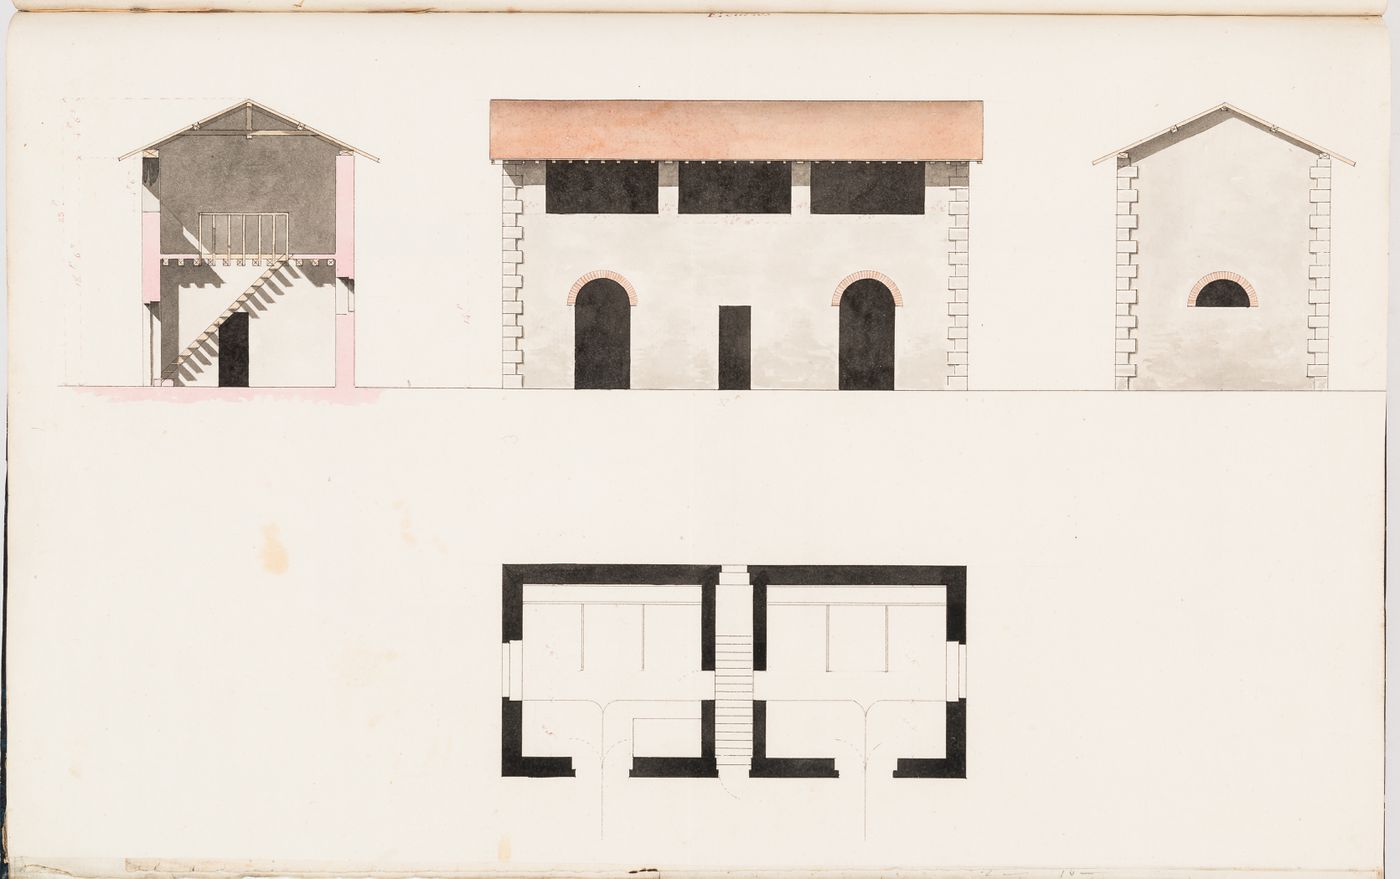 Plan, section and elevations for a stable, Domaine de La Vallée